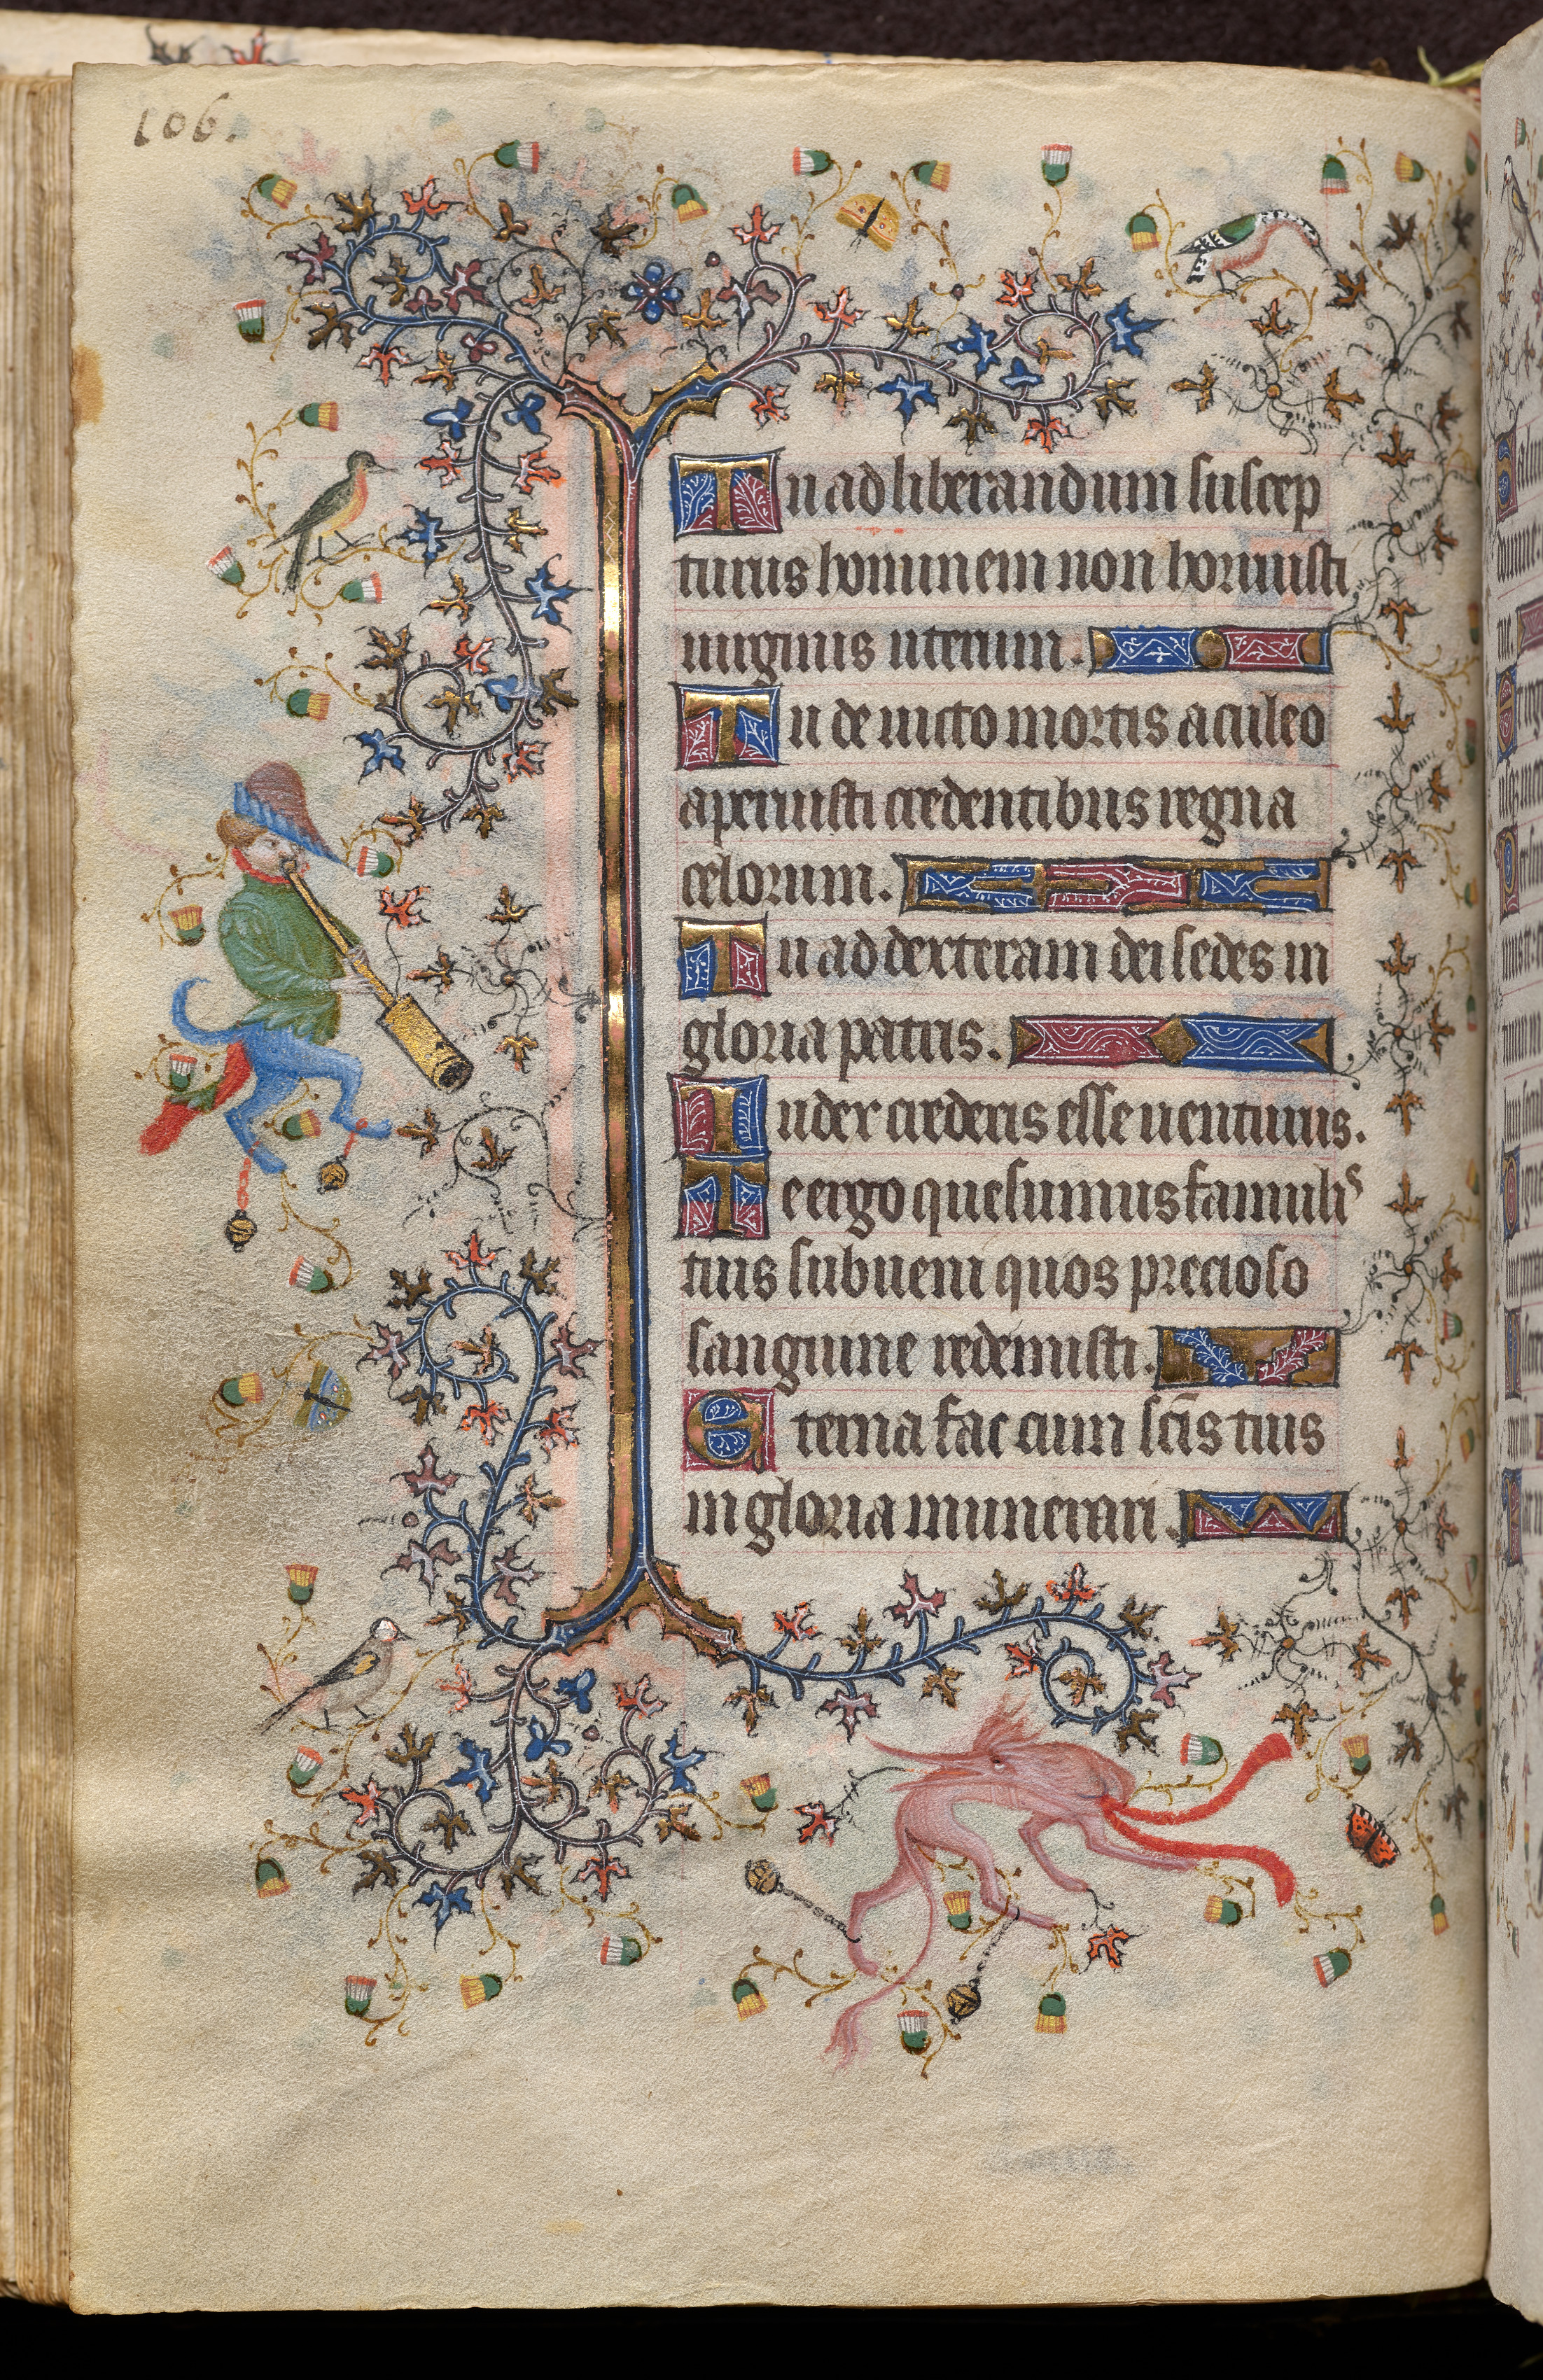 Hours of Charles the Noble, King of Navarre (1361-1425): fol. 53v, Text